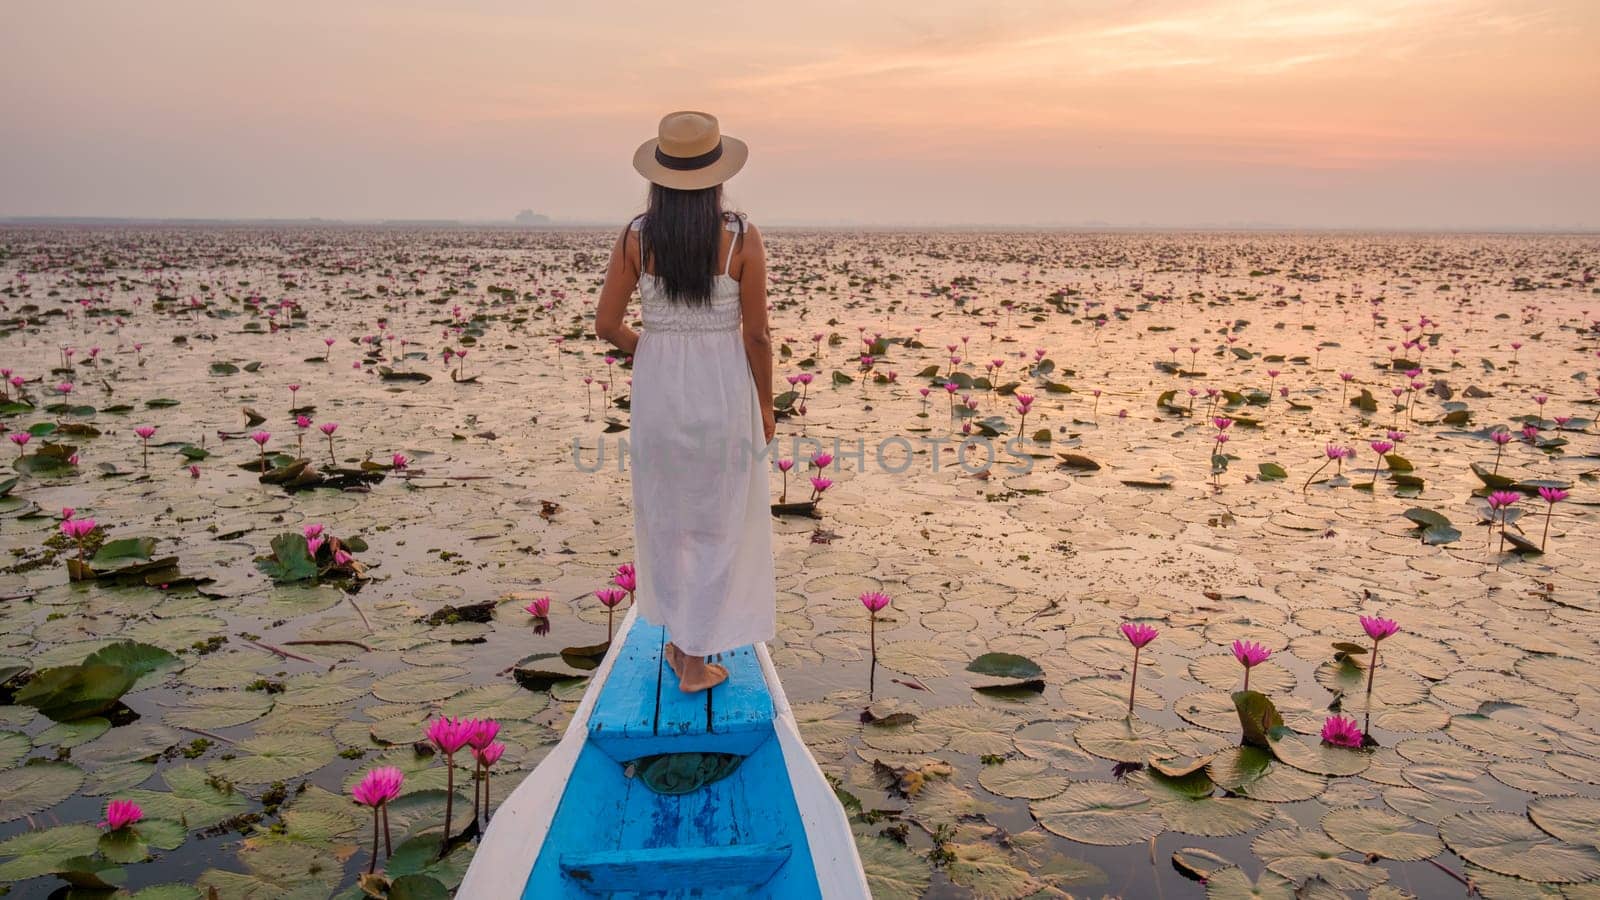 The sea of red lotus, Lake Nong Harn, Udon Thani, Thailand. Asian woman with hat and dress on a boat at the red lotus lake in the Isaan